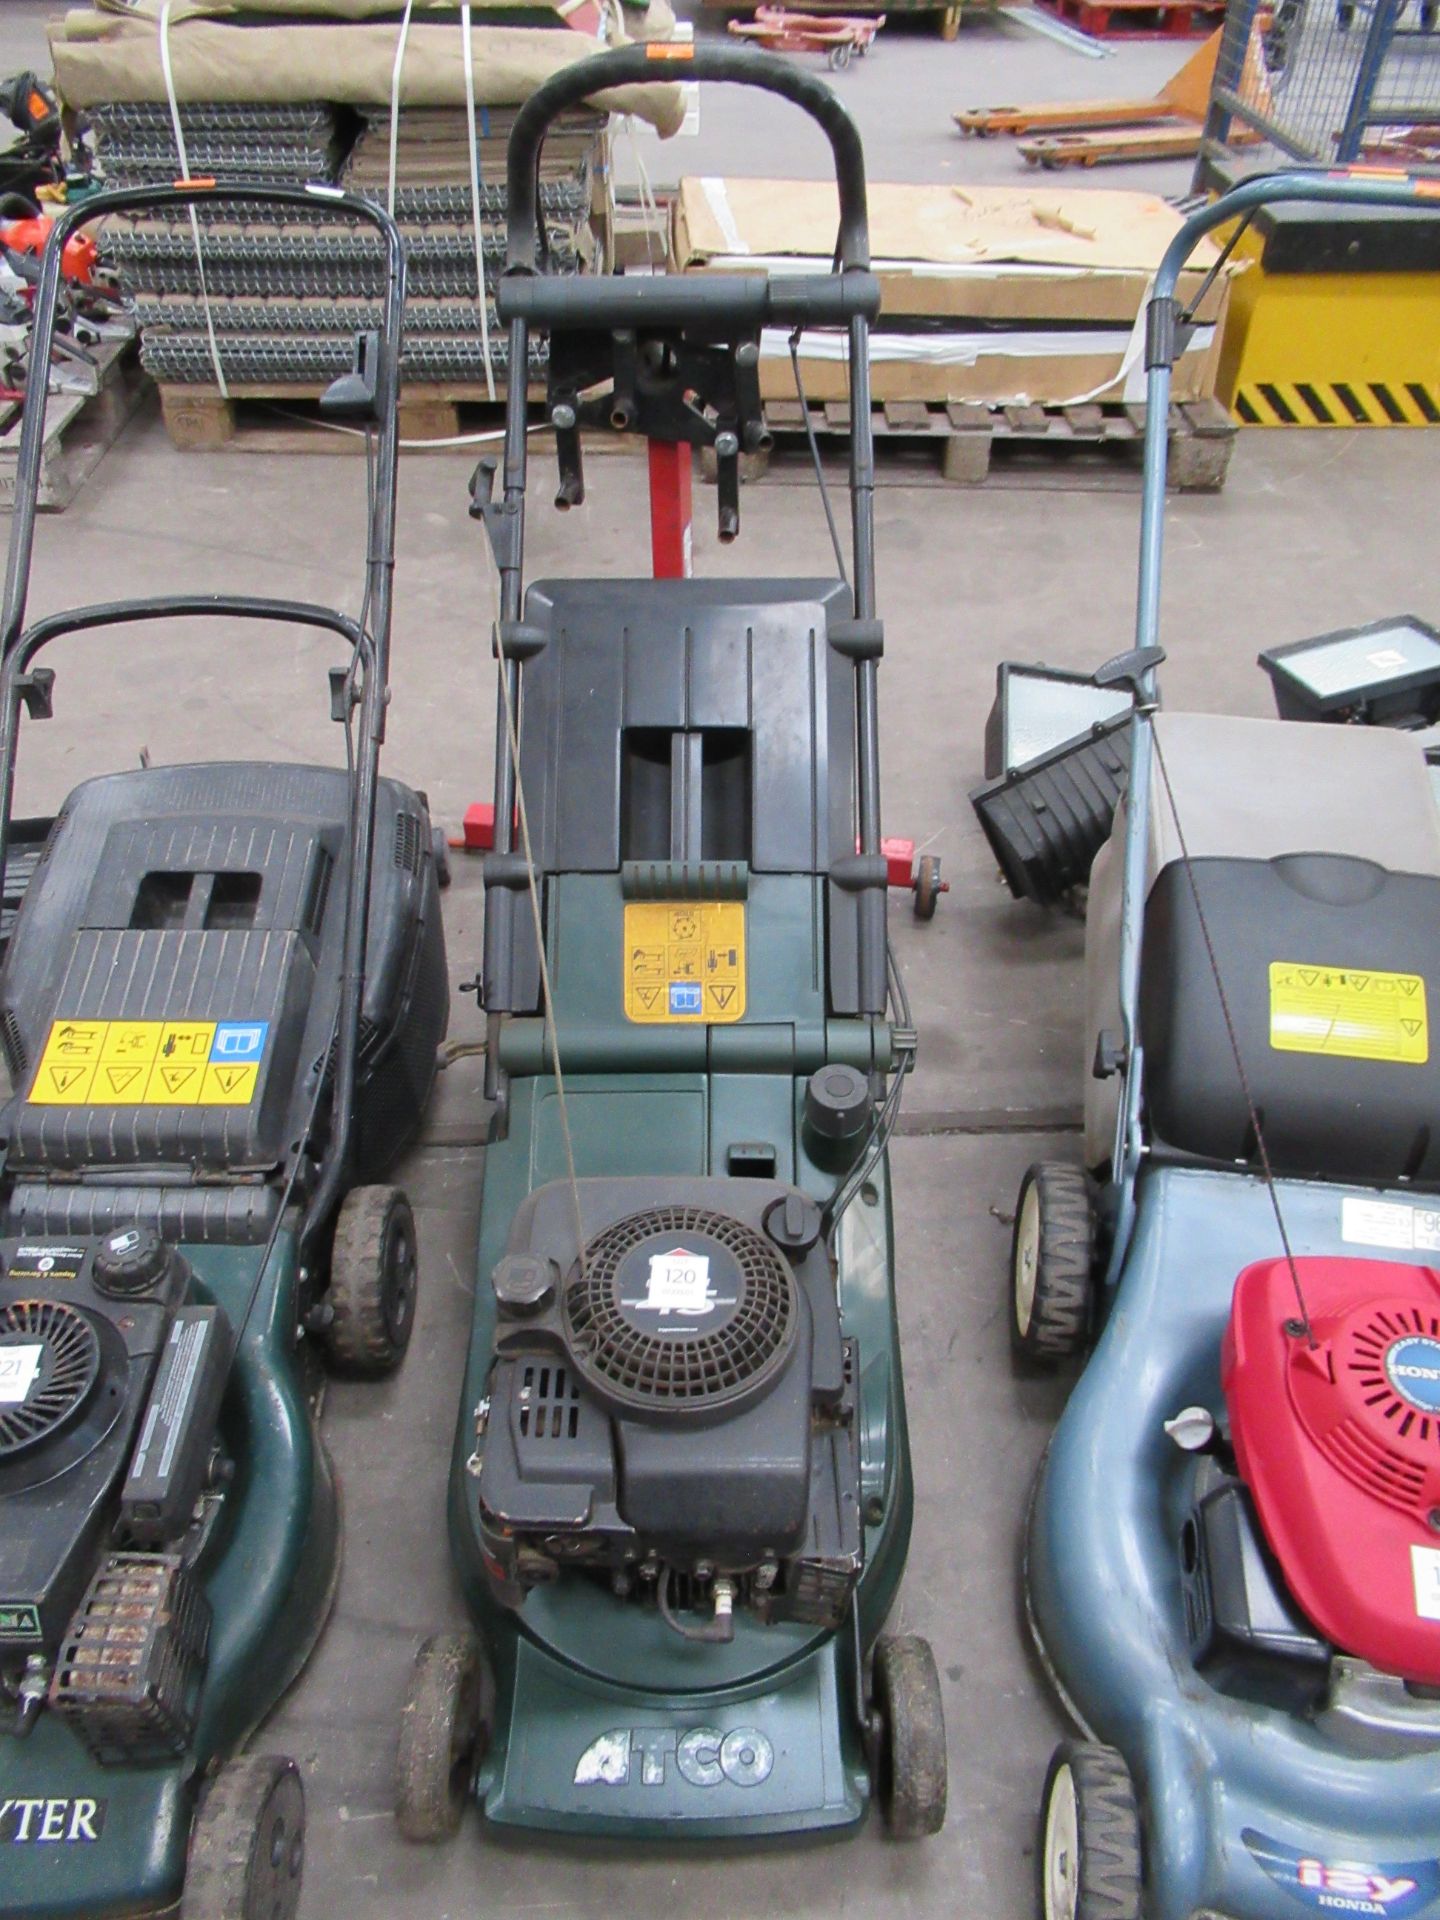 Atco Admiral 16" Rear Roller Rotary Mower